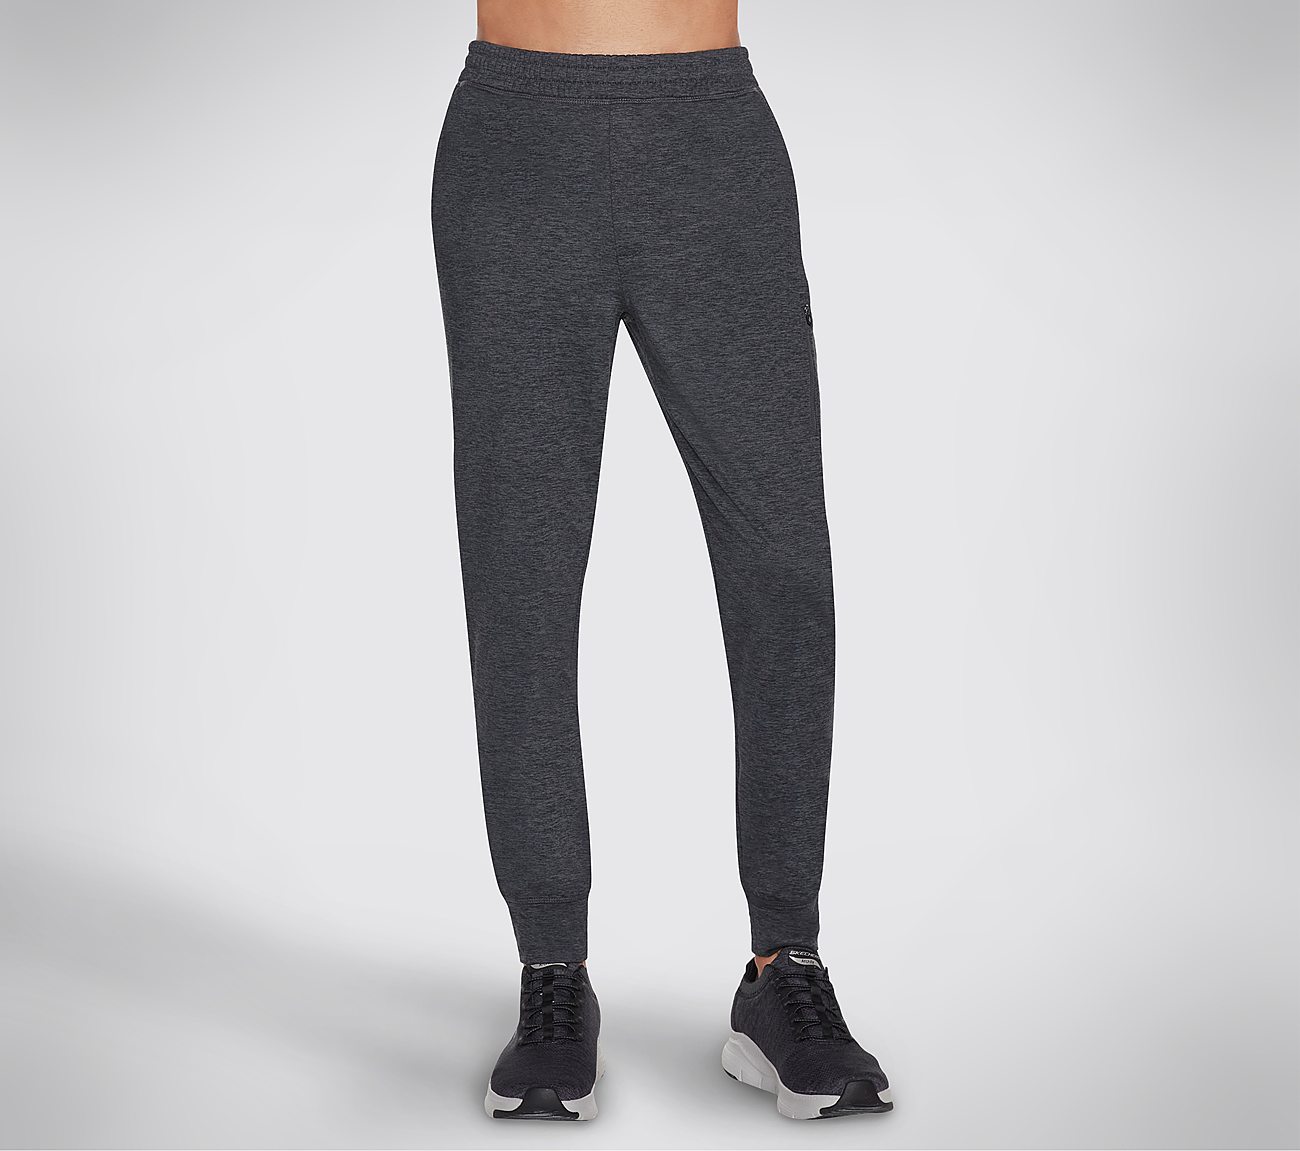 SKECH-KNITS ULTRA GO JOGGER, CCHARCOAL Apparel Lateral View